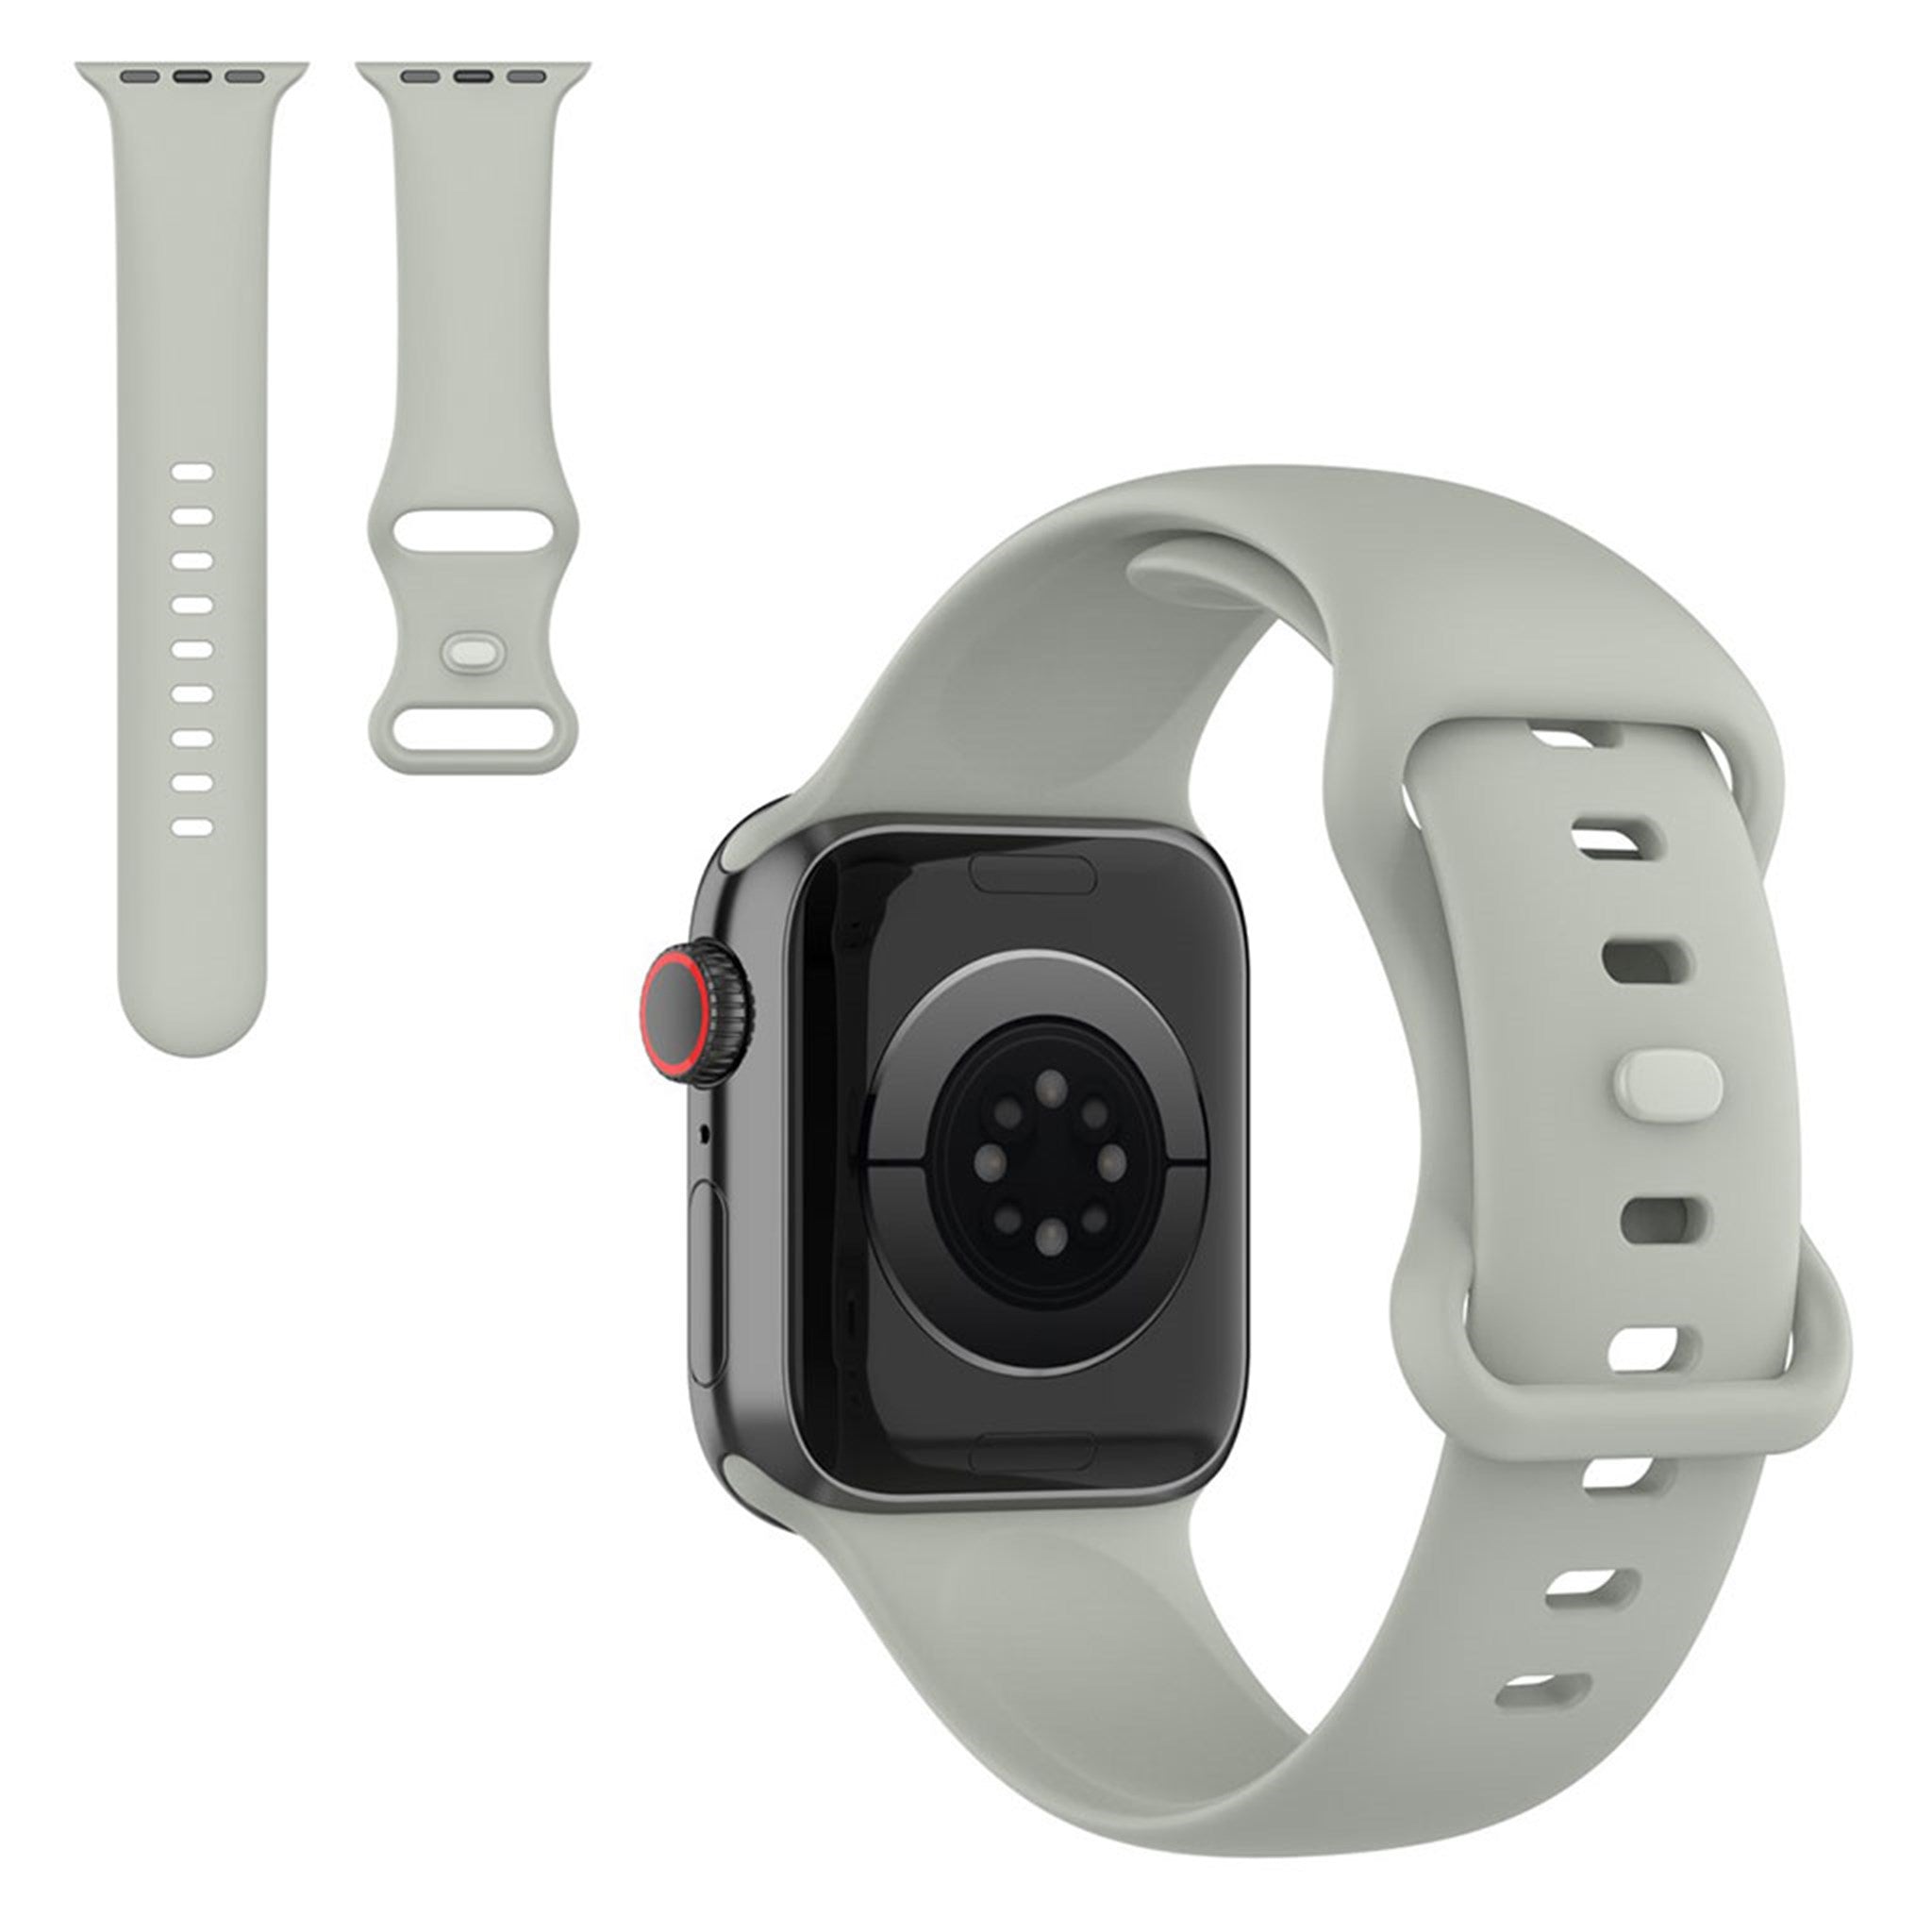 Silicone watch strap for Apple Watch 40mm - Grey / Size: S